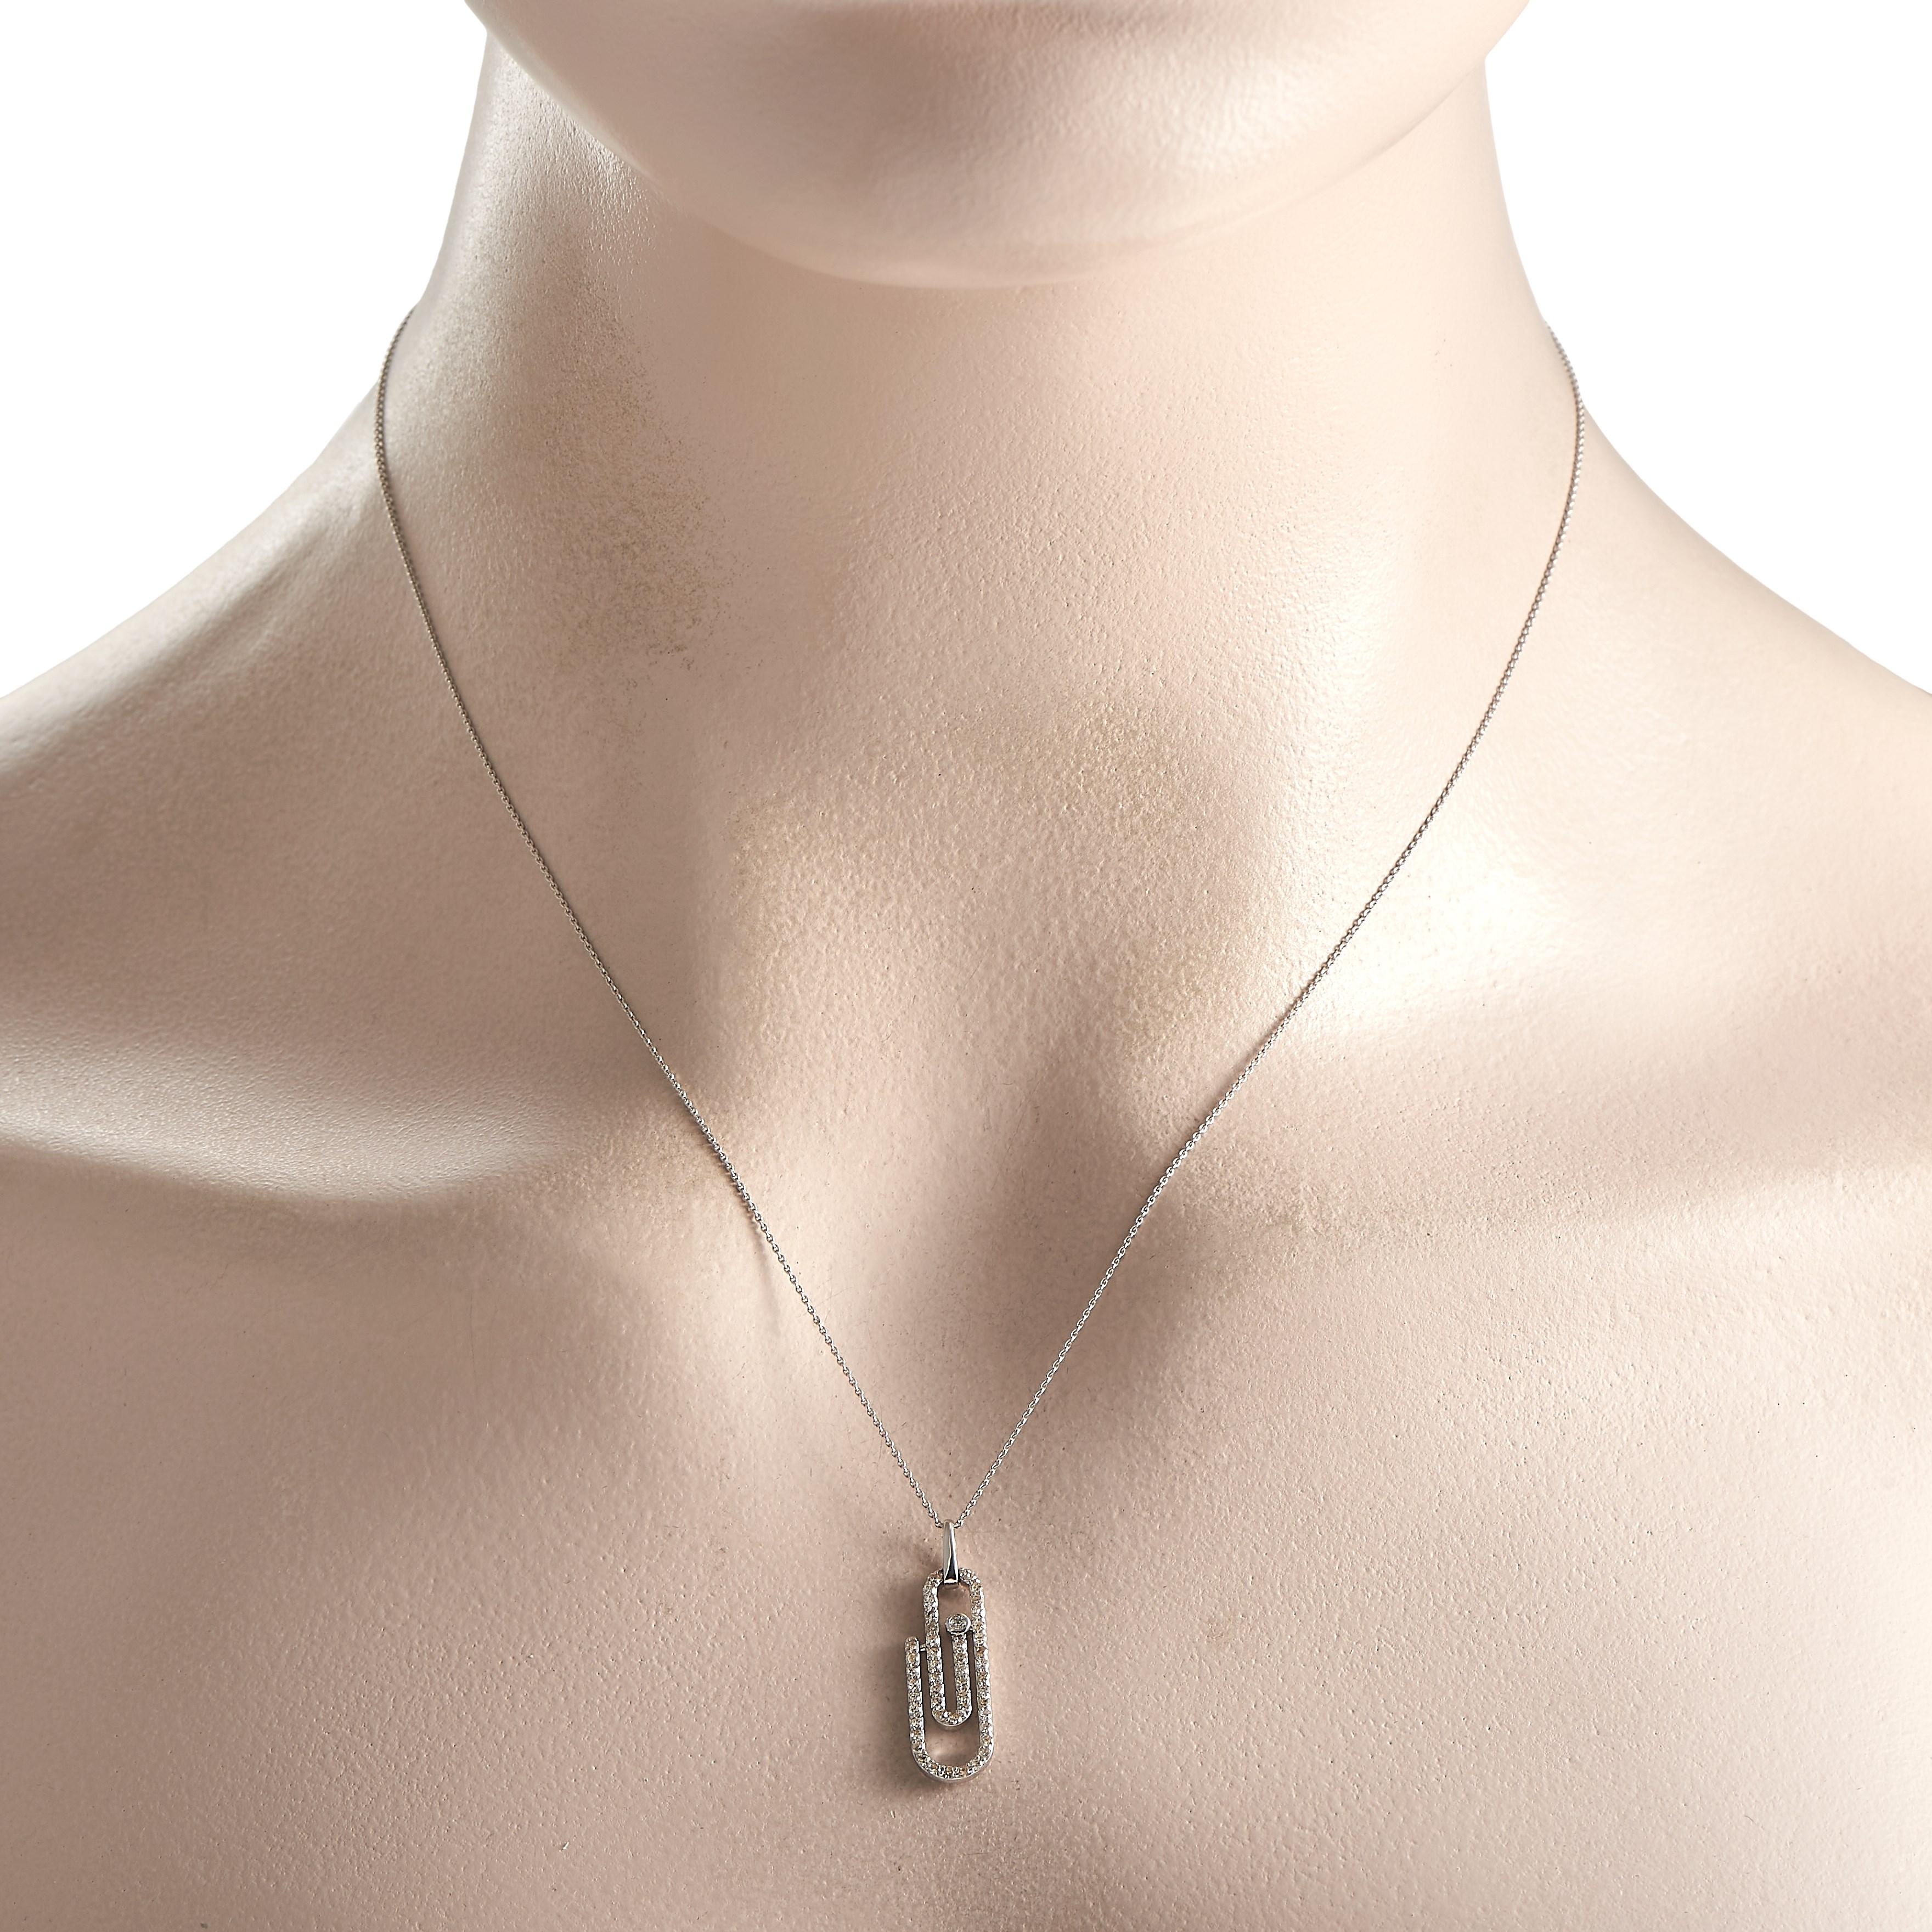 All it takes is modern, cool girl jewelrylike this diamond paperclip necklaceto jazz up your favorite basic ensembles. This white gold necklace features an 18 chain and a 0.75 x 0.37 paperclip-shaped pendant. Petite round diamonds trace the